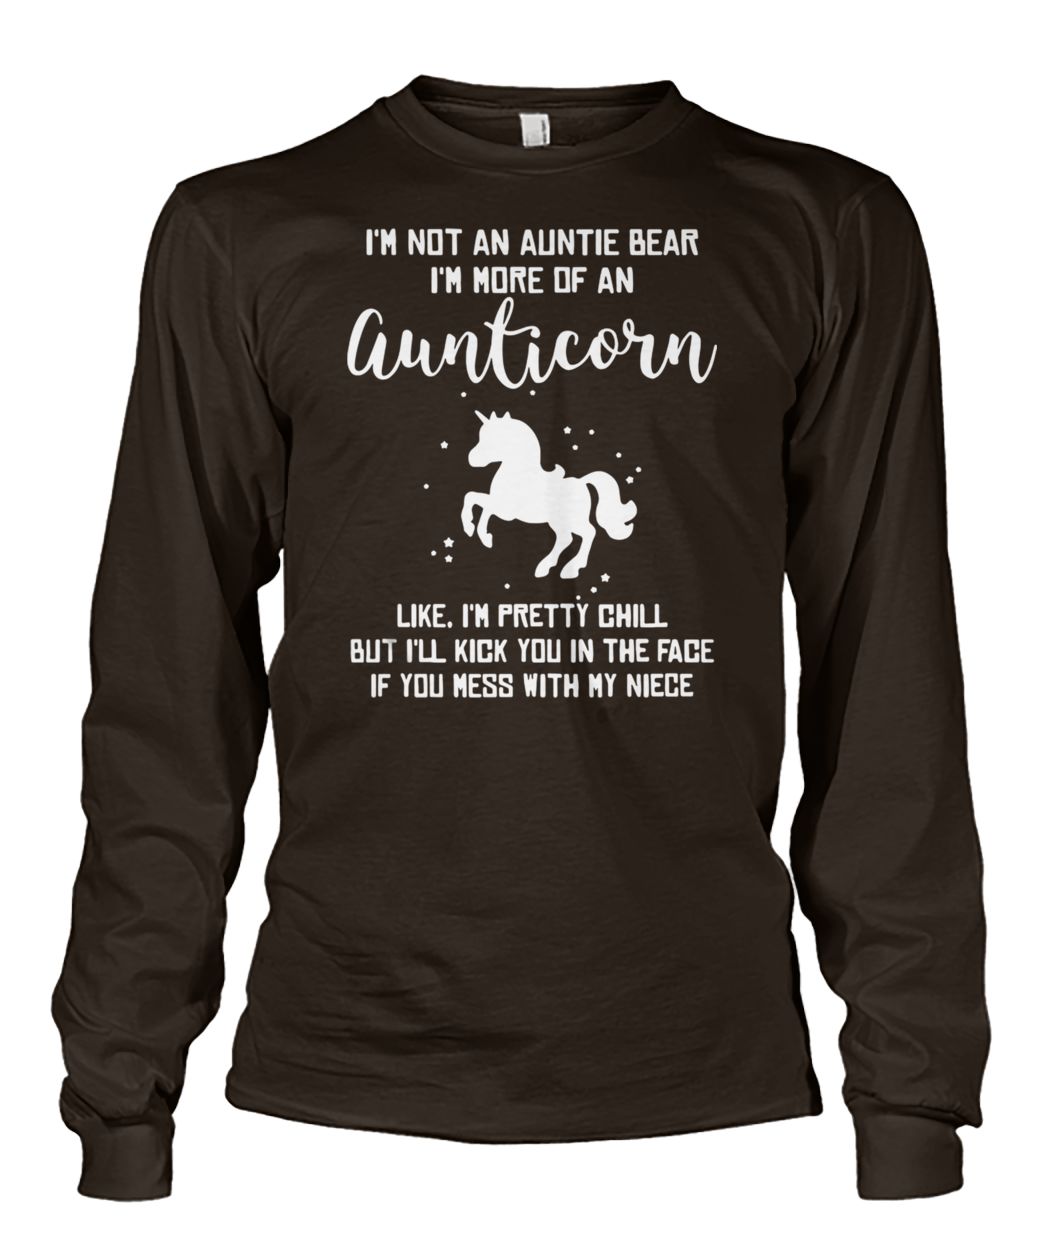 I’m not an auntie bear I’m more of an aunticorn like I’m pretty chill unisex long sleeve